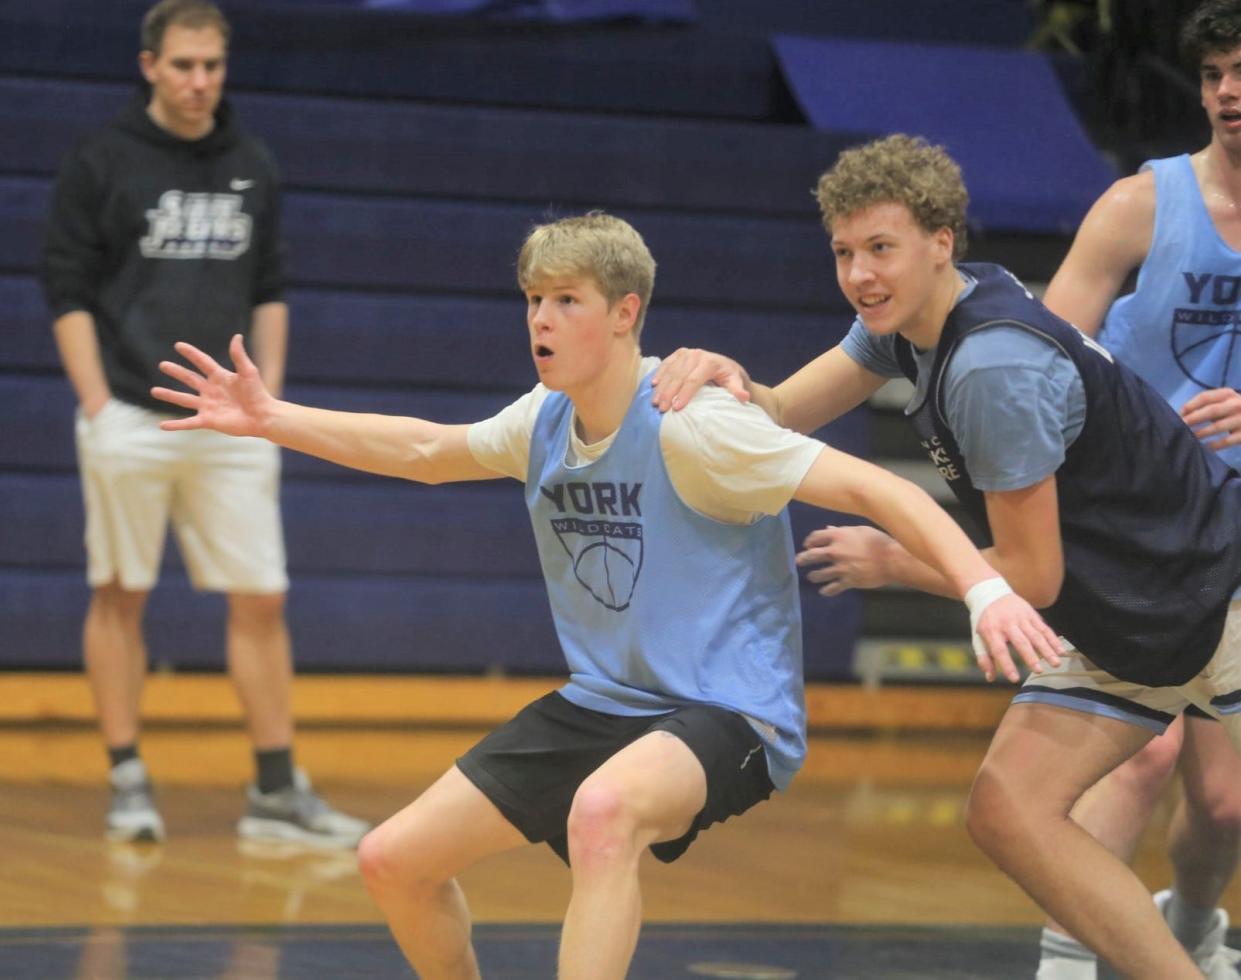 York's Haydn Forbes posts up teammate Lucas Ketchum during Monday's boys basketball practice. Forbes is expected to be back in game action later in the season as he deals with an injured left thumb.